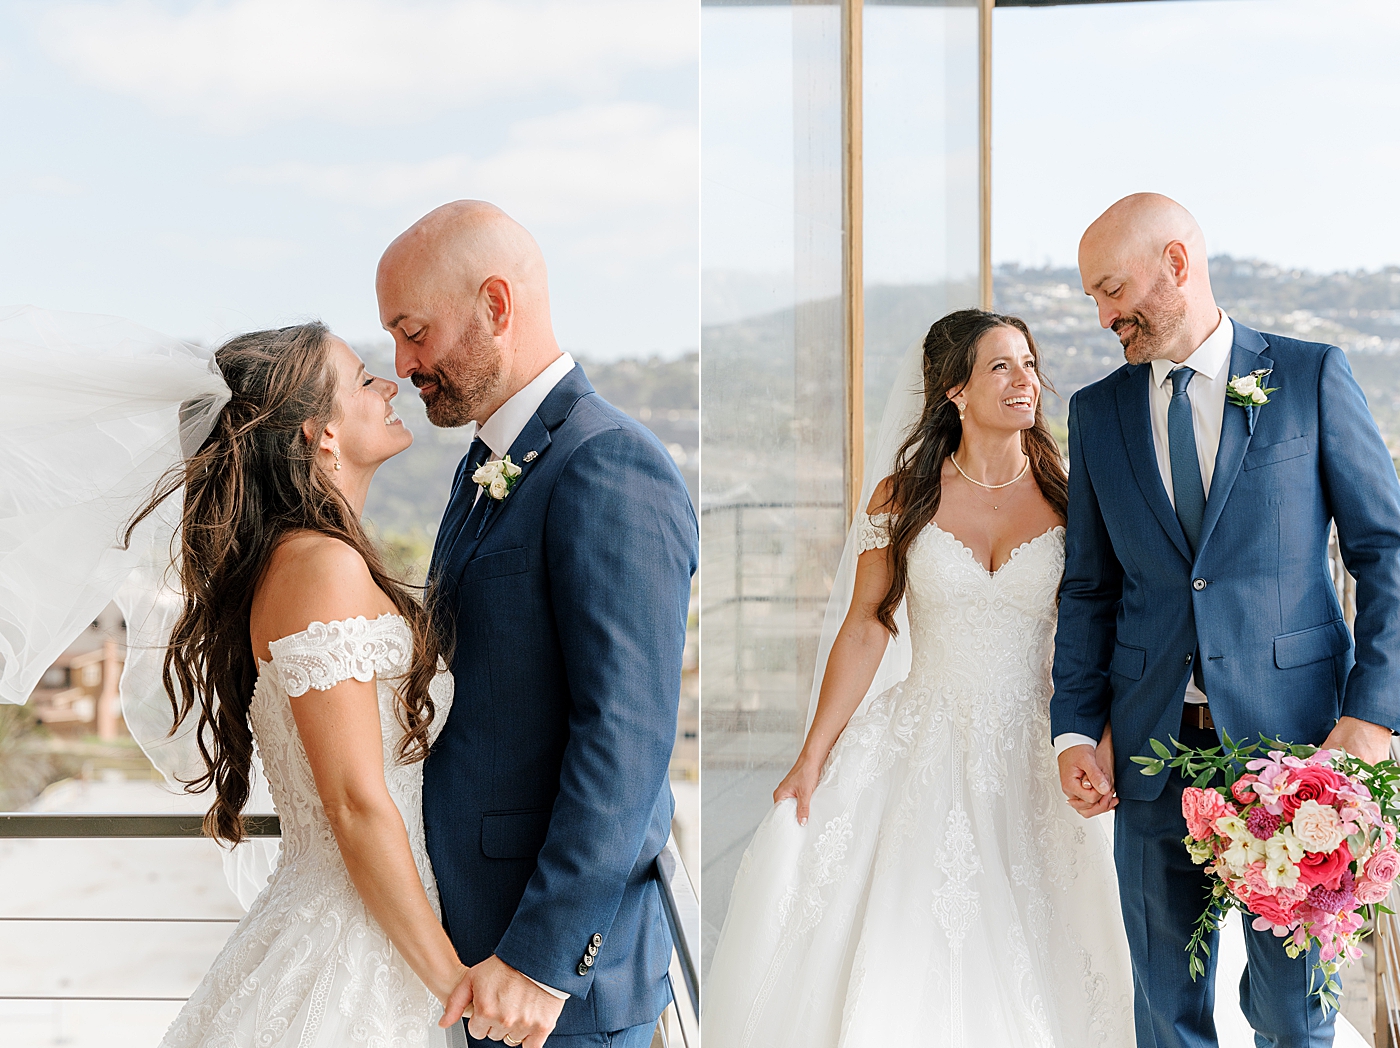 Two vignettes of a groom in navy suit and bride in wedding dress. One of the two standing closely and smiling at each other and the other of the two holding hands and walking towards the camera on a wooden balcony that overlooks a tropical, sunny city | Image by Hope Helmuth Photography